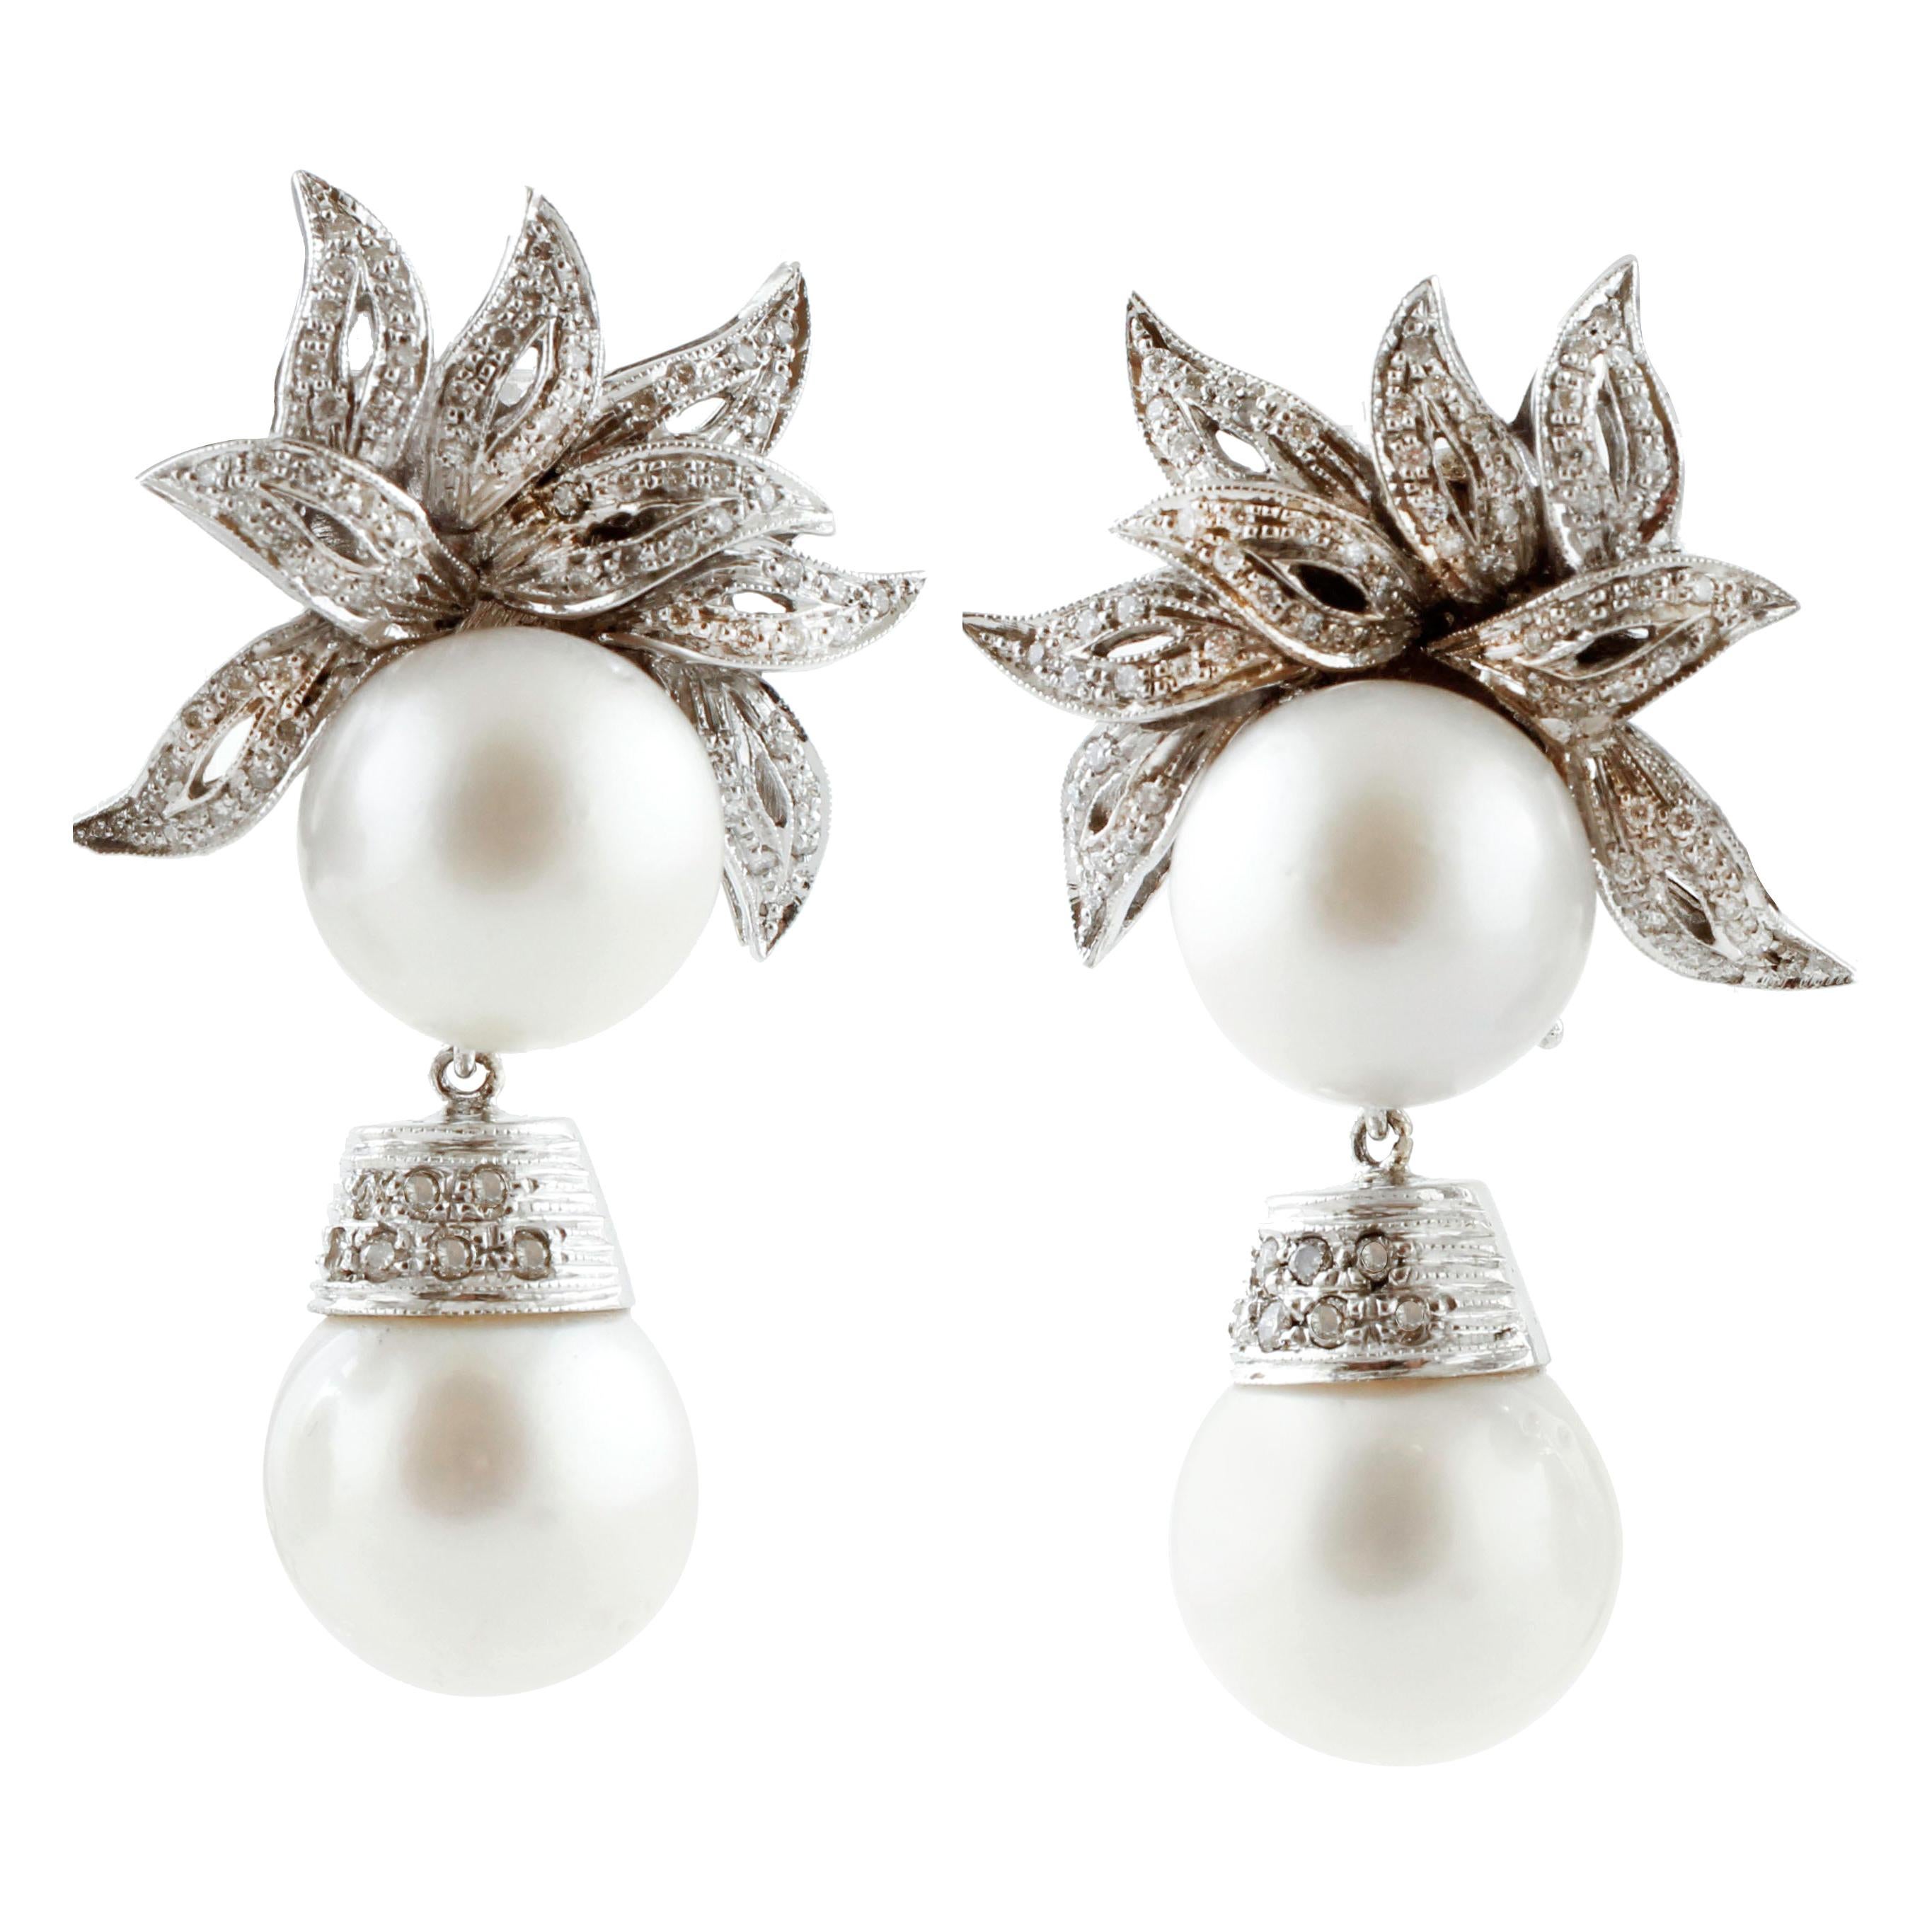 80.23 Carat South-Sea Pearls, White Diamonds, White Gold Clip-On/Drop Earrings